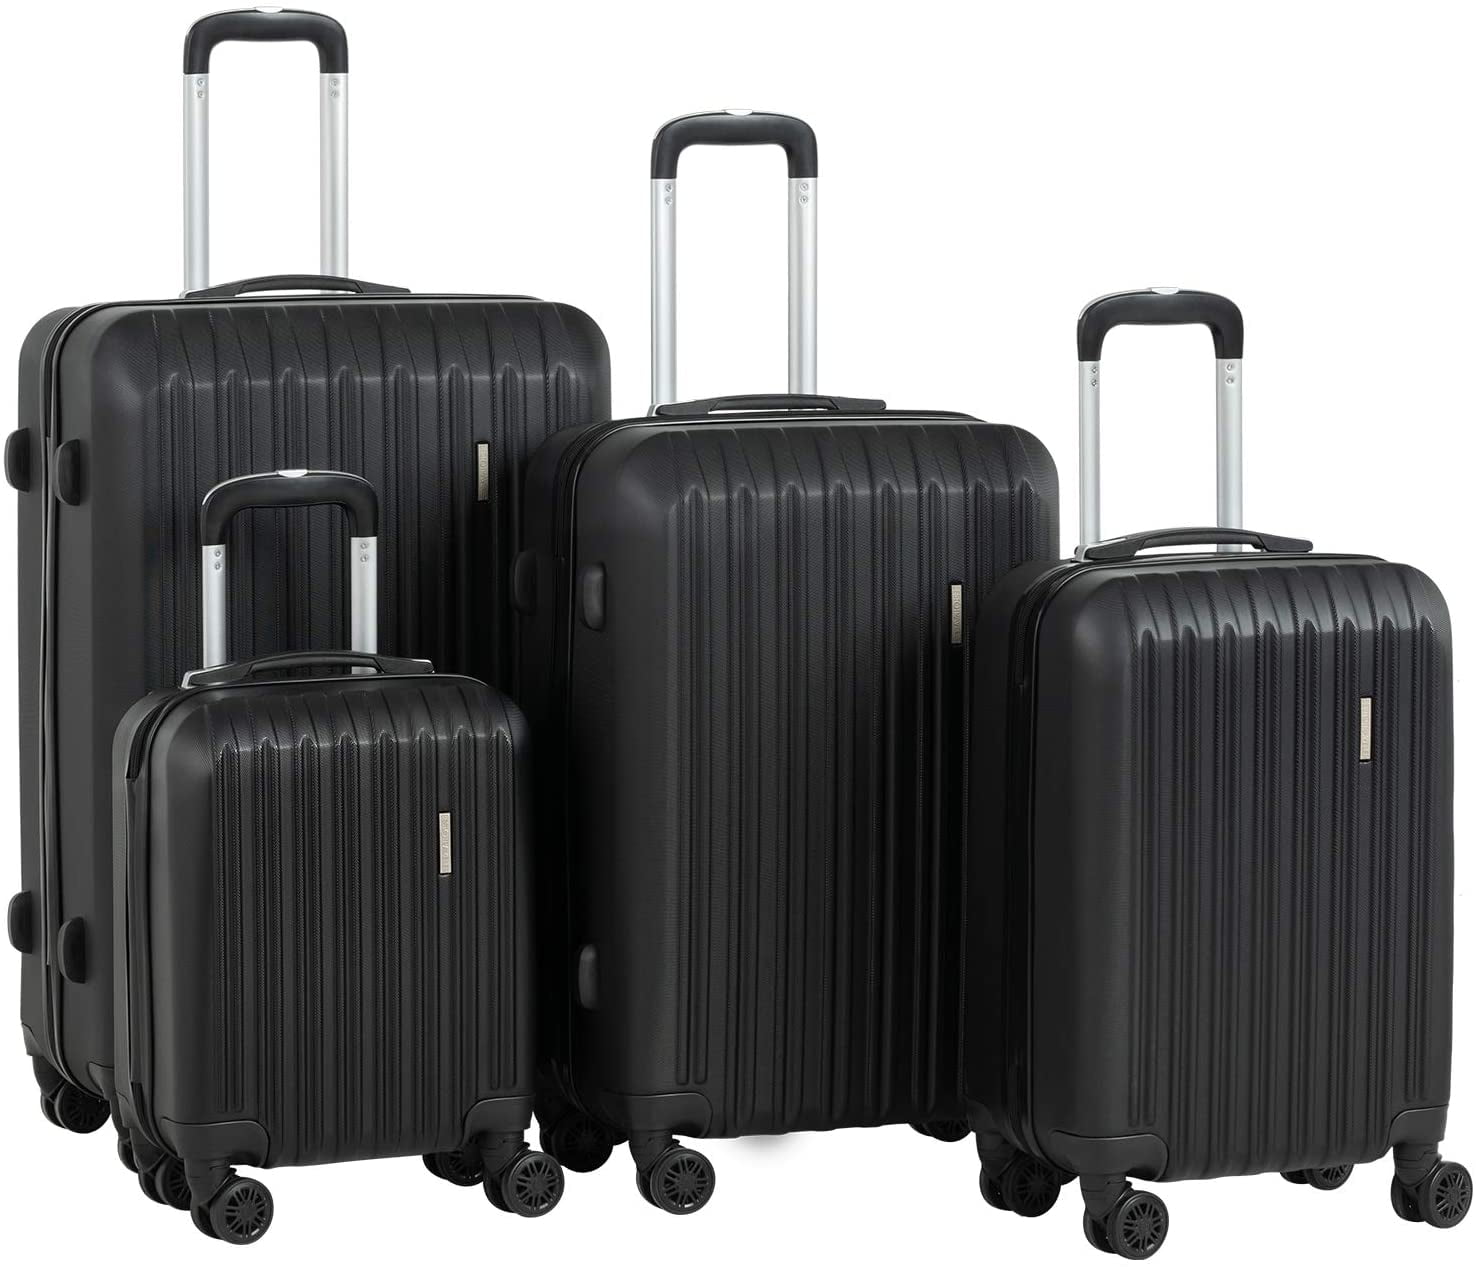 Murtisol 4 Pieces ABS Luggage Sets Hardside Spinner Lightweight Durable Spinner Suitcase 16 20 24 28,4PCS Black 